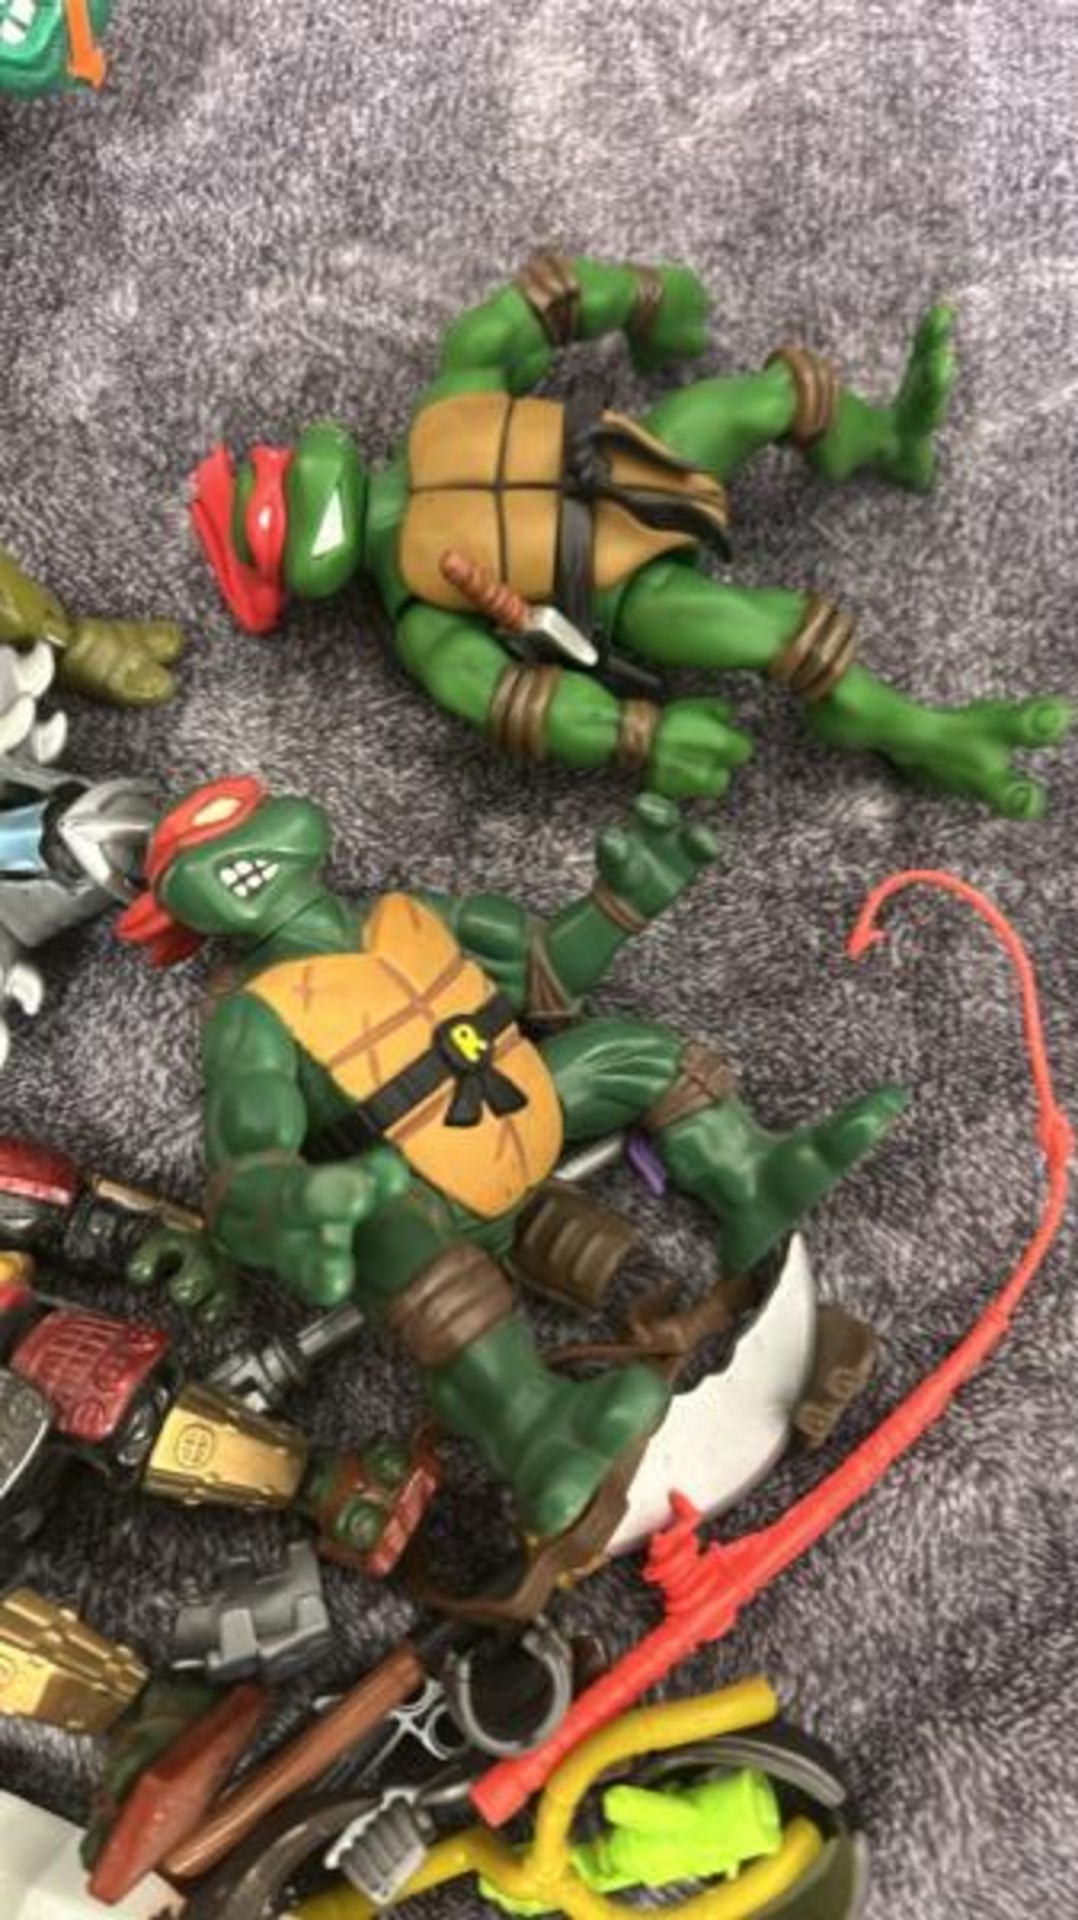 Teenage Mutant Ninja Turtles - Assorted loose figures including some based on the movie versions and - Image 4 of 13